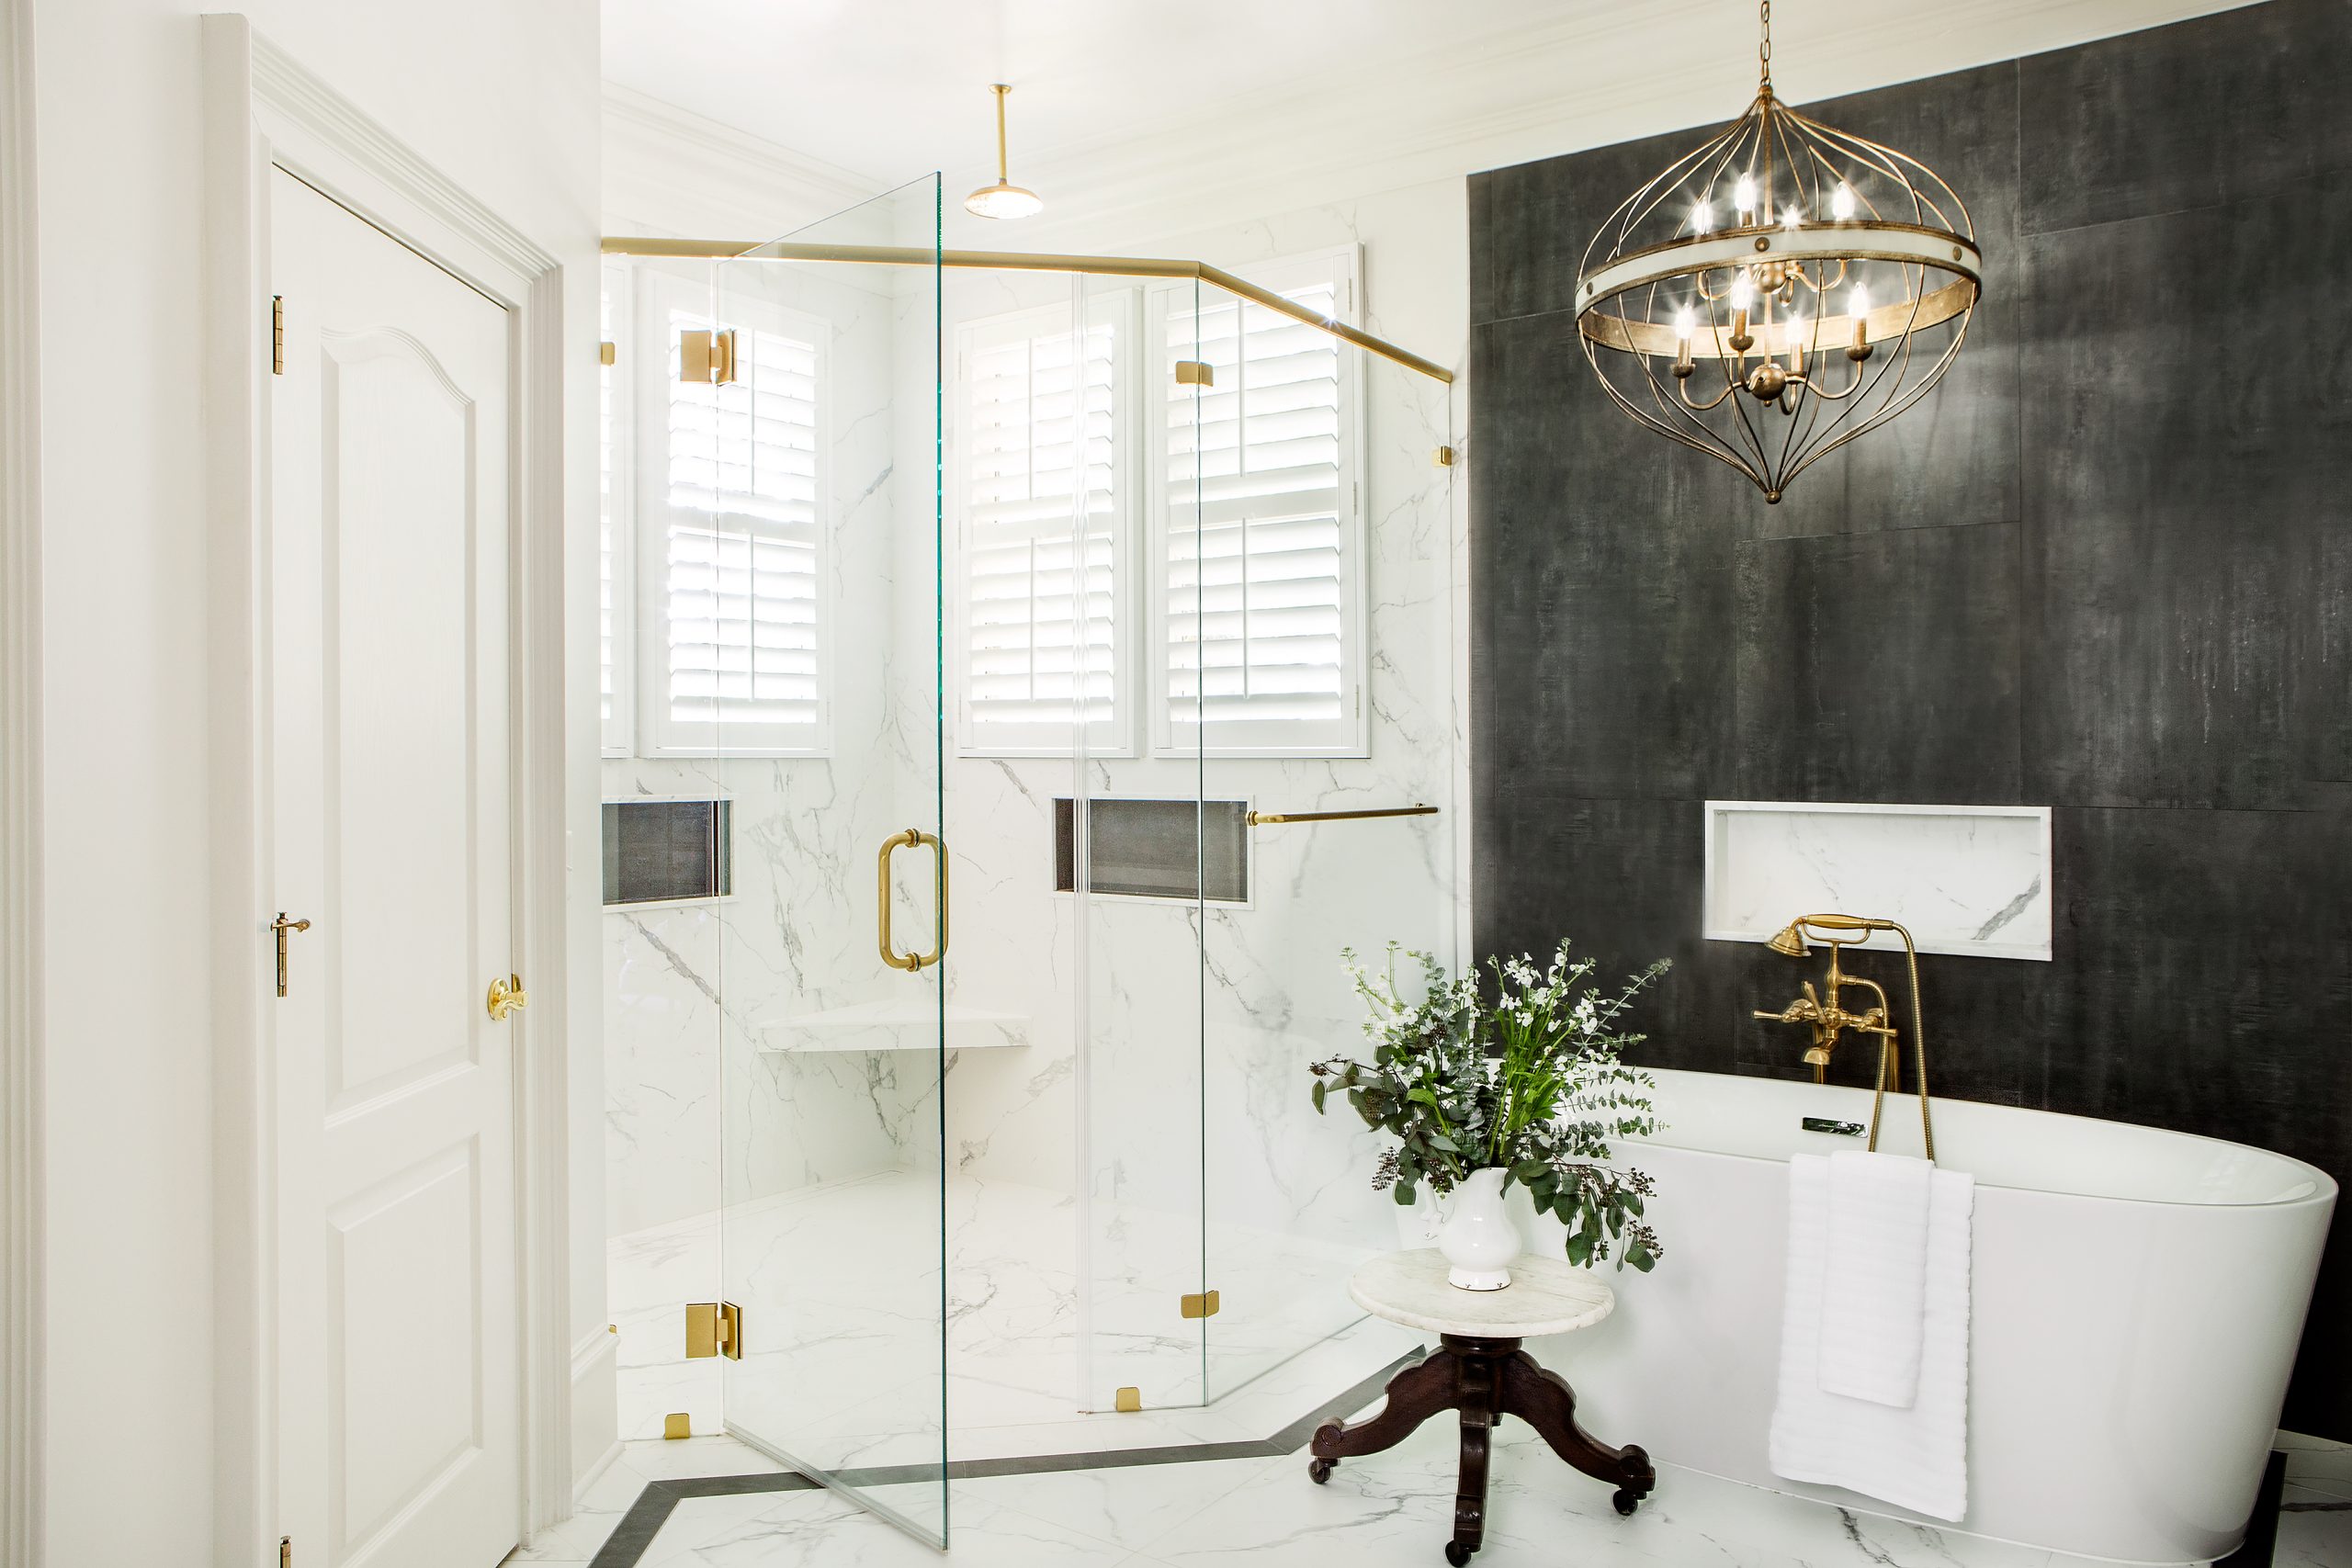 A deep soaking tub next to a wall of dark tile selected by Veronica from Palmetto Tile, accented by a modern chandelier, is the focal point of the gracious master en suite bath.